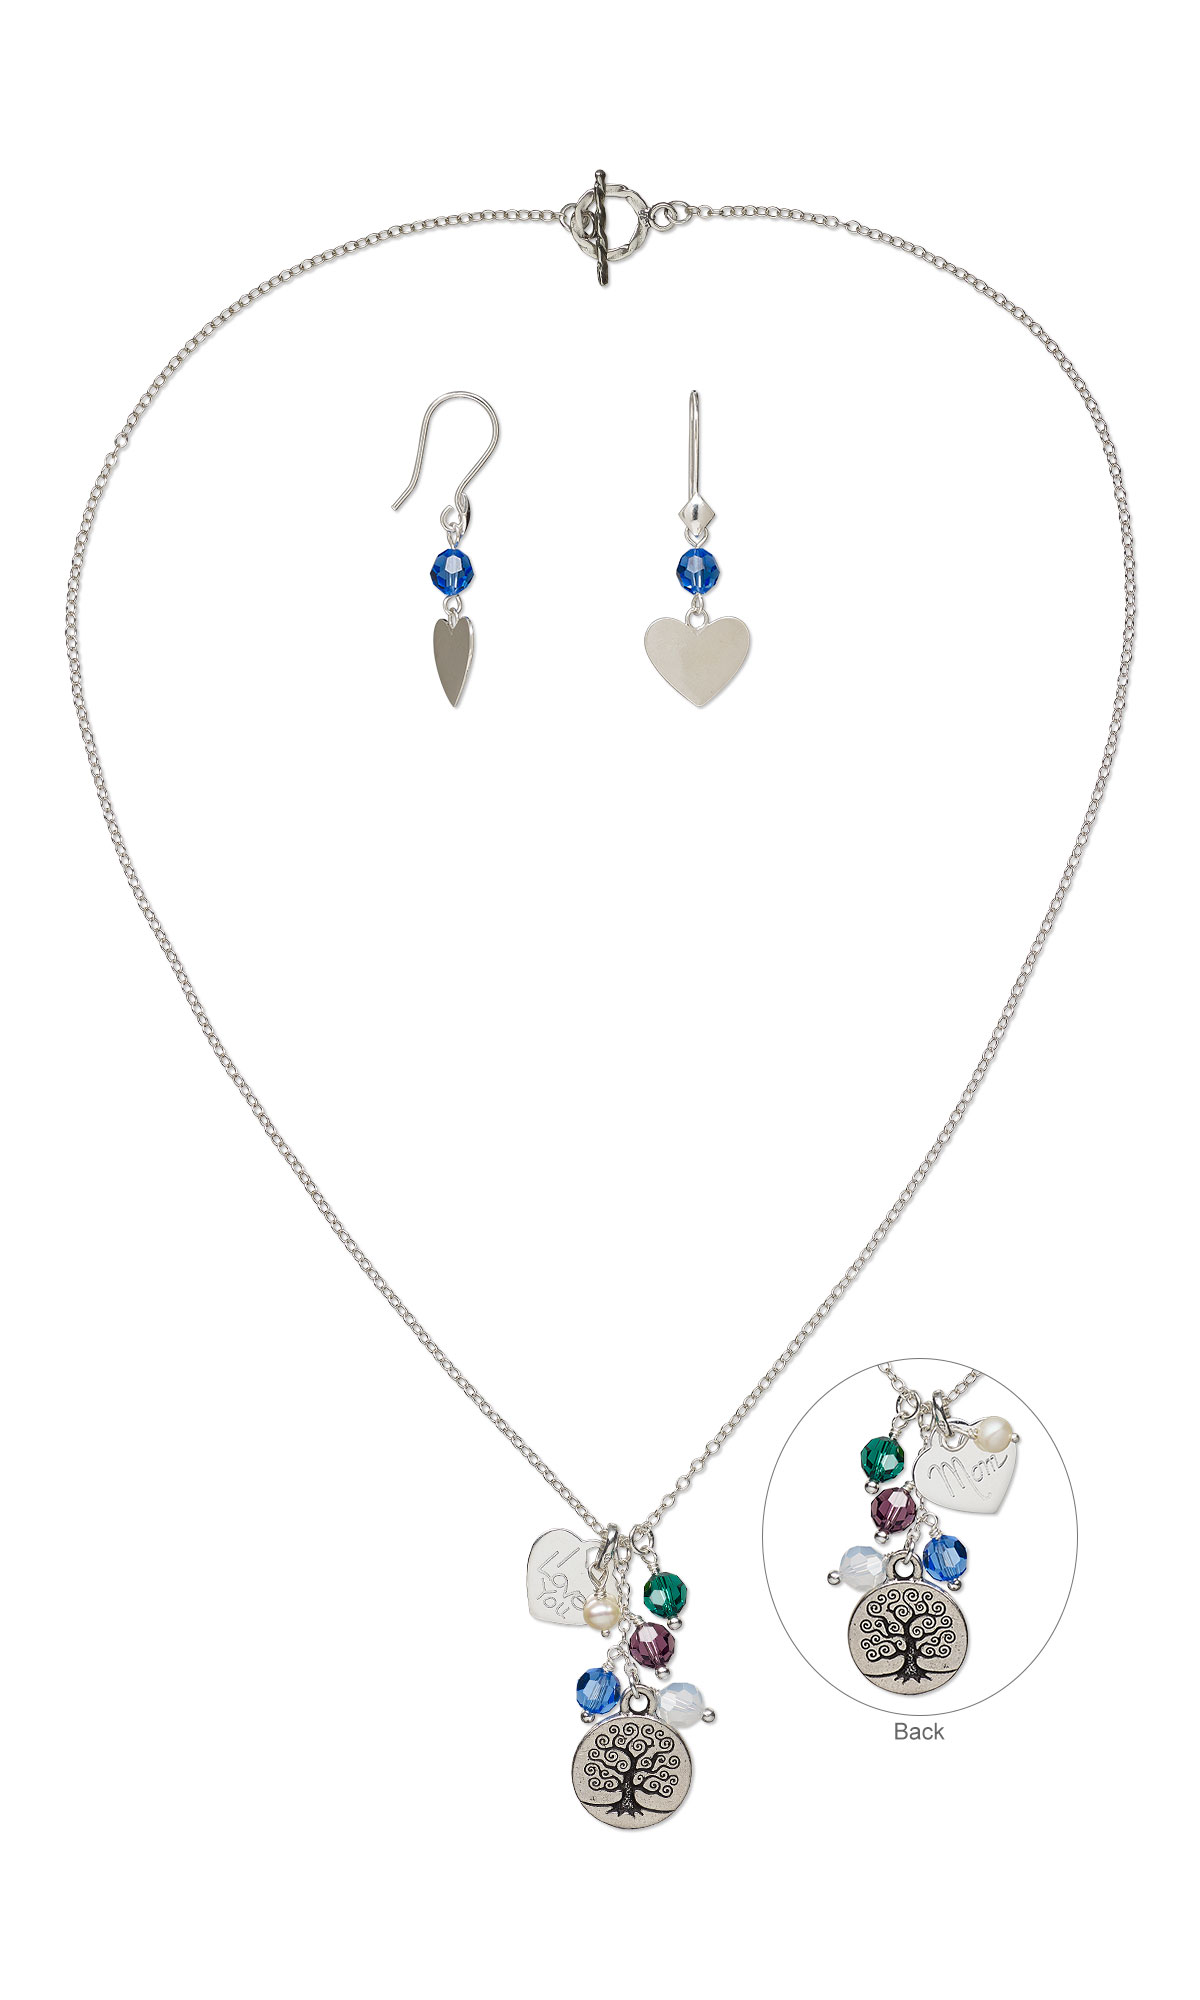 Jewelry Design - Single-Strand Necklace and Earring Set with Swarovski ...